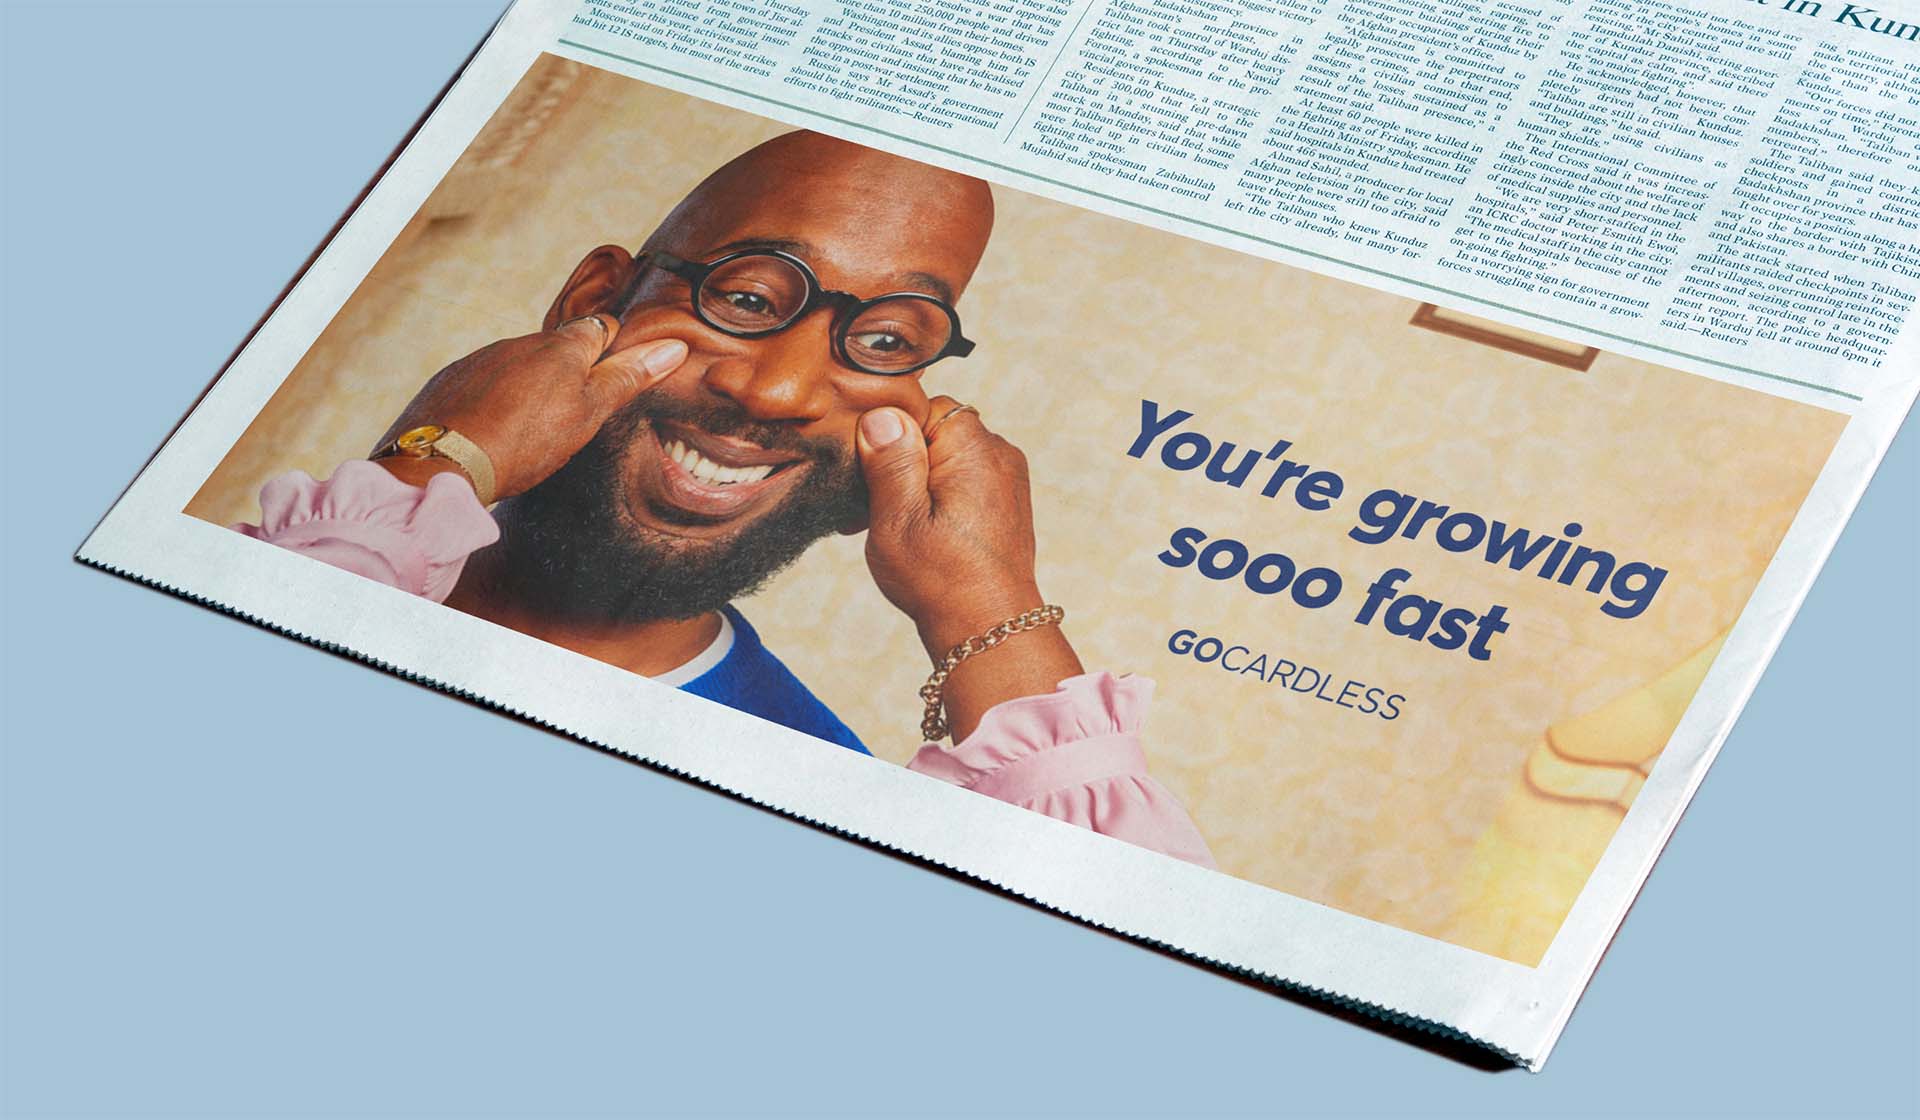 GoCardless Grandma You're Growing Sooo Fast - Fintech Advertising - Ad Campaign by Mellor&Smith - Paul Mellor